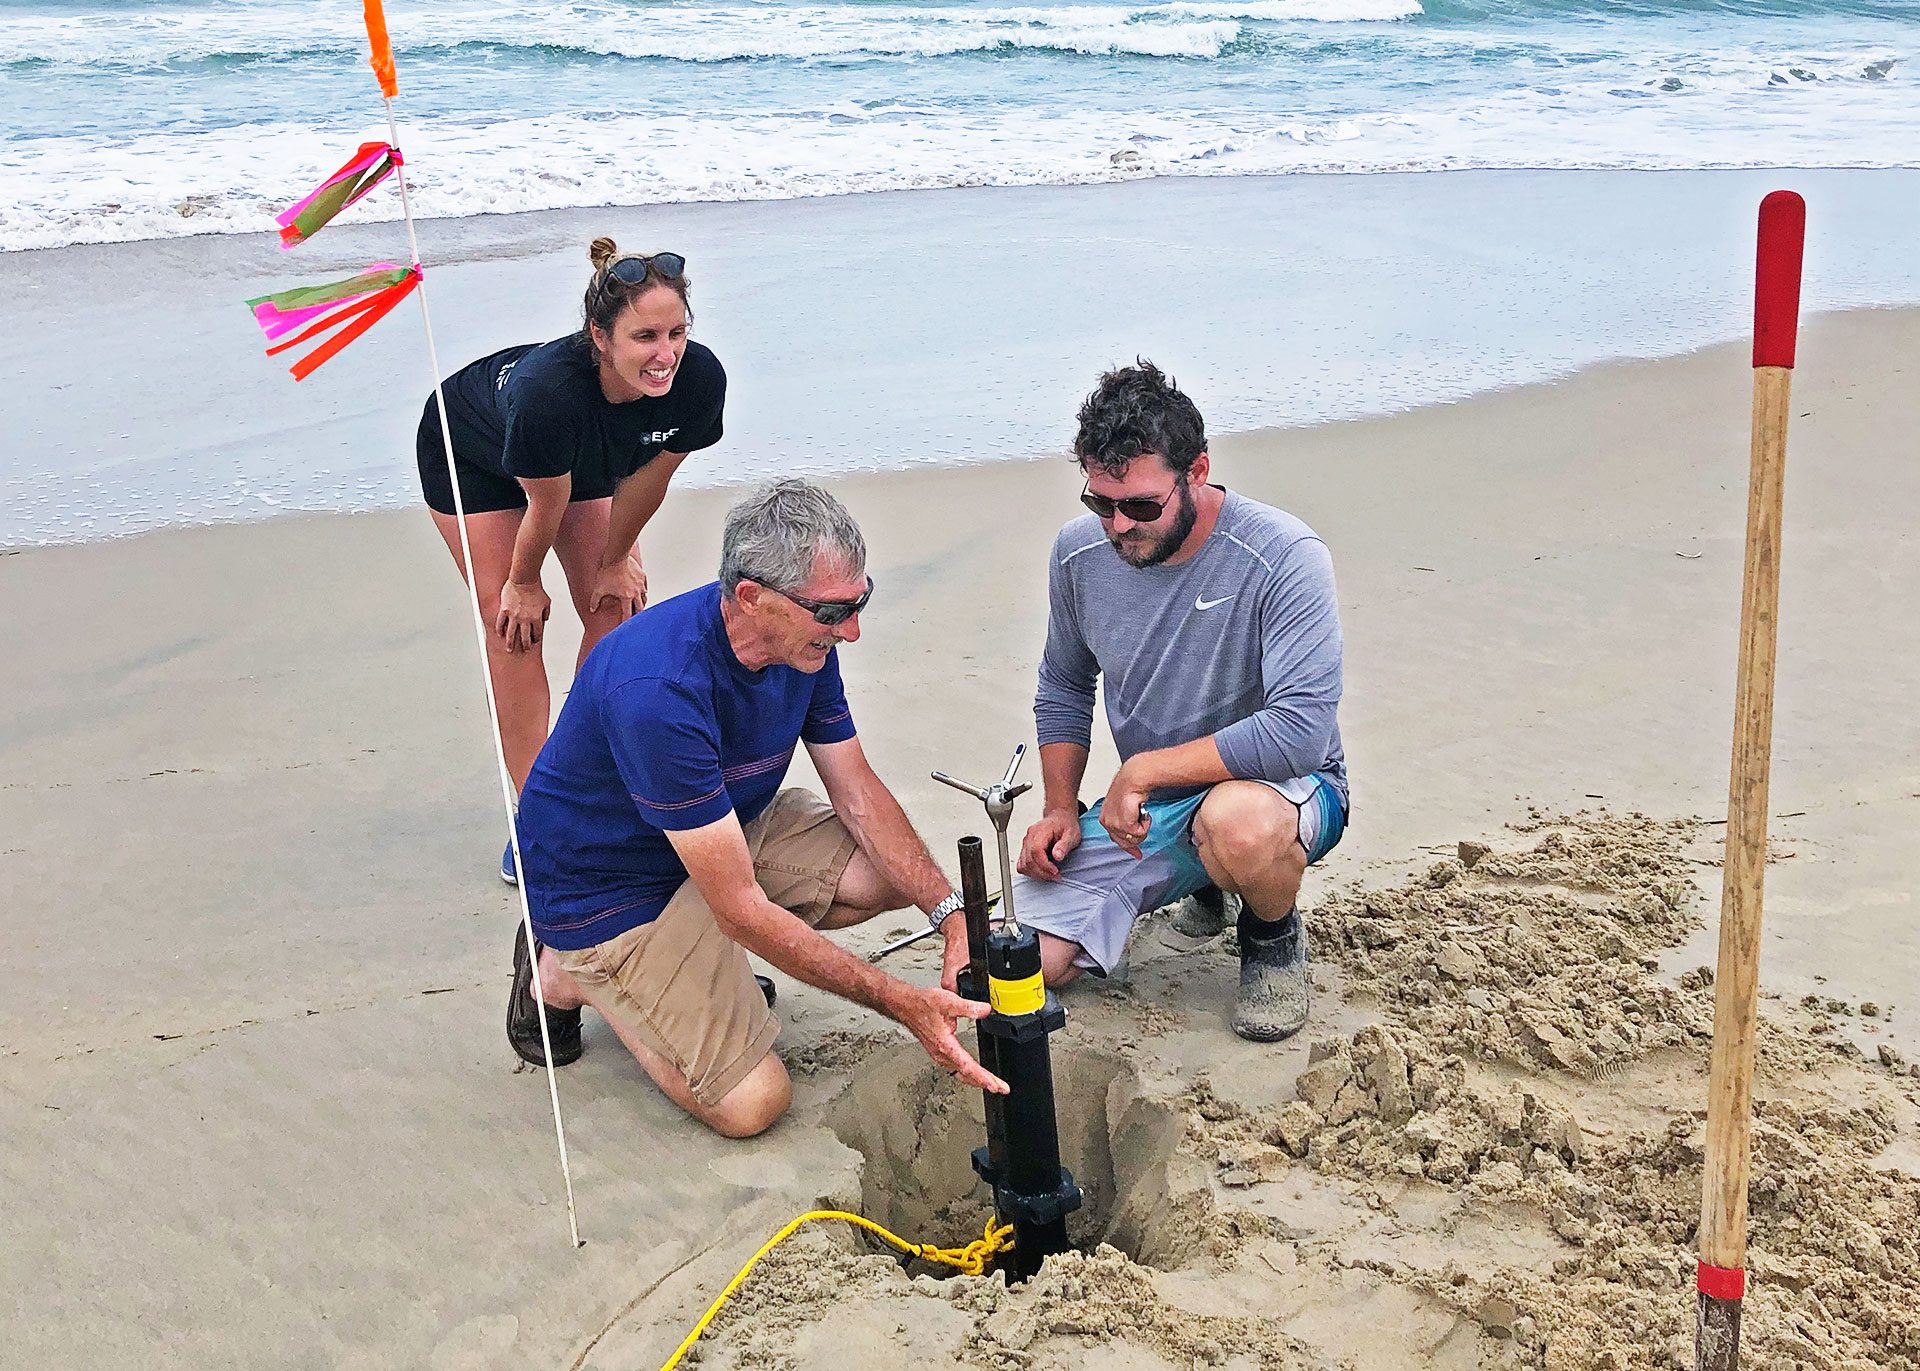 WHOI senior scientist Steve Elgar (middle), research associate Levi Gorrell (right), and U.S. Army oceanographer Kate Brodie (left), deploy a current meter to measure seawater flowing along and across the beach as Hurricane Dorian inundates the North Carolina coast.